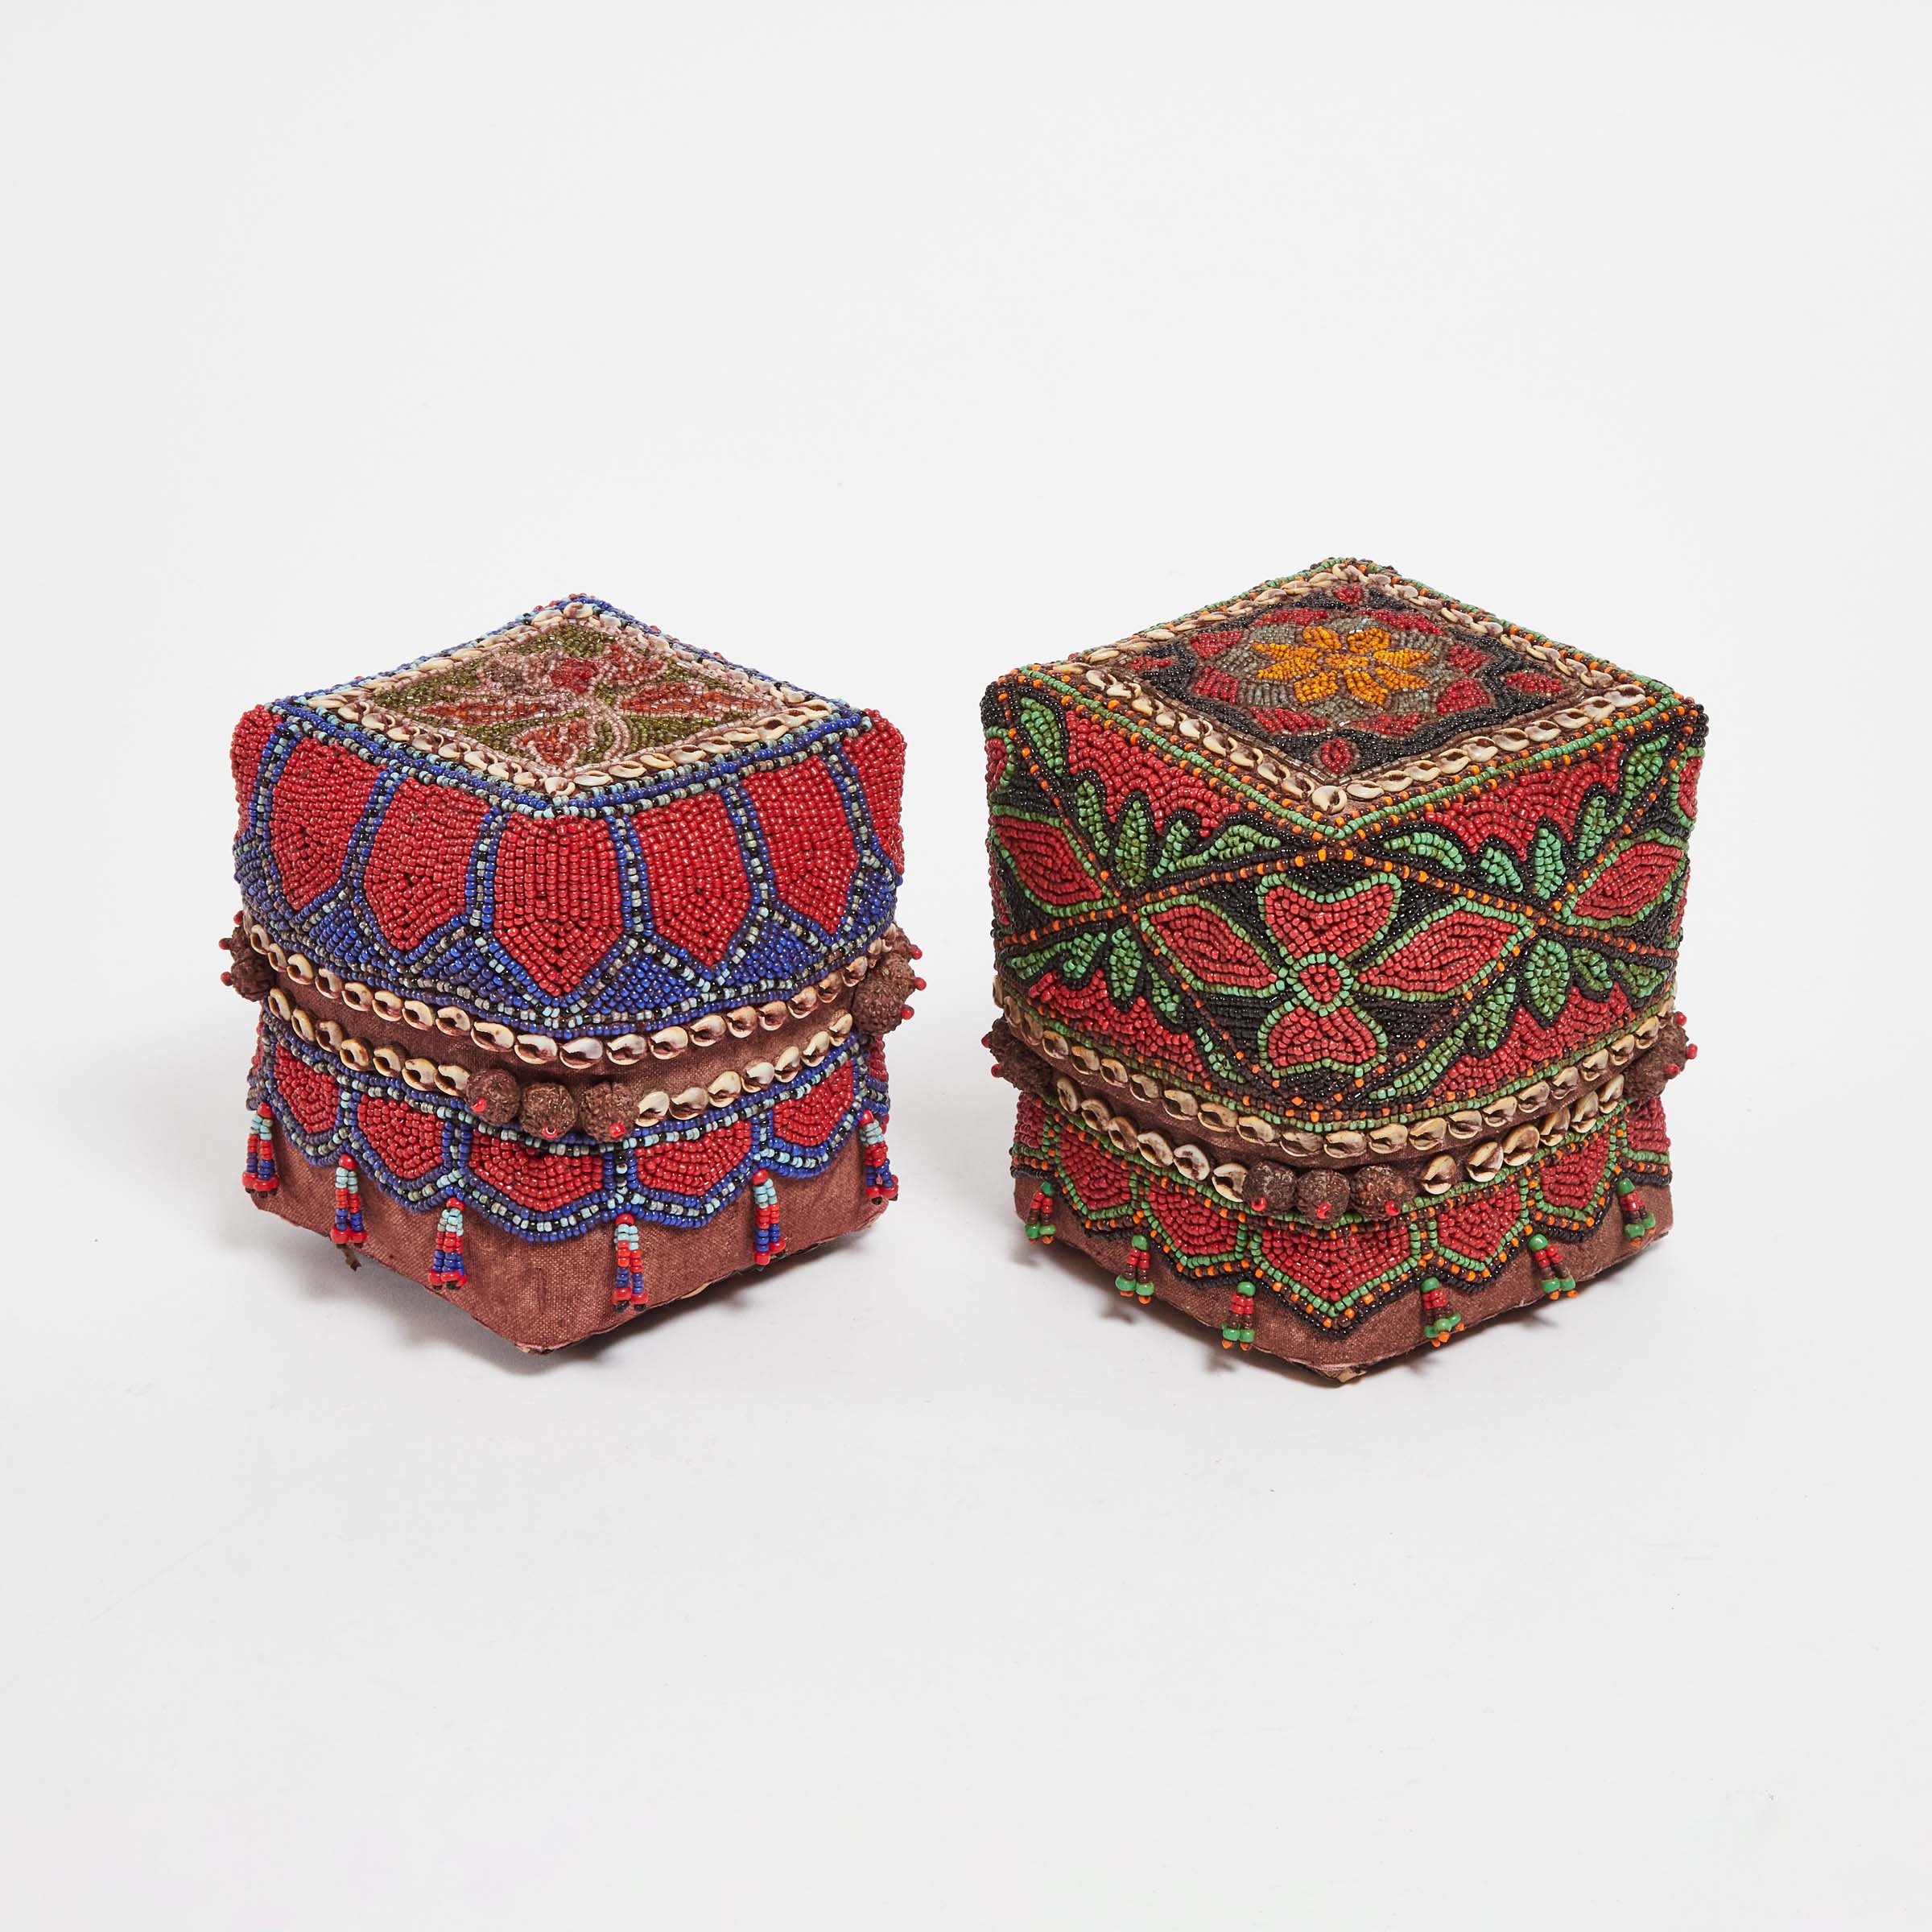 Two Indonesian Beaded Ceremonial or